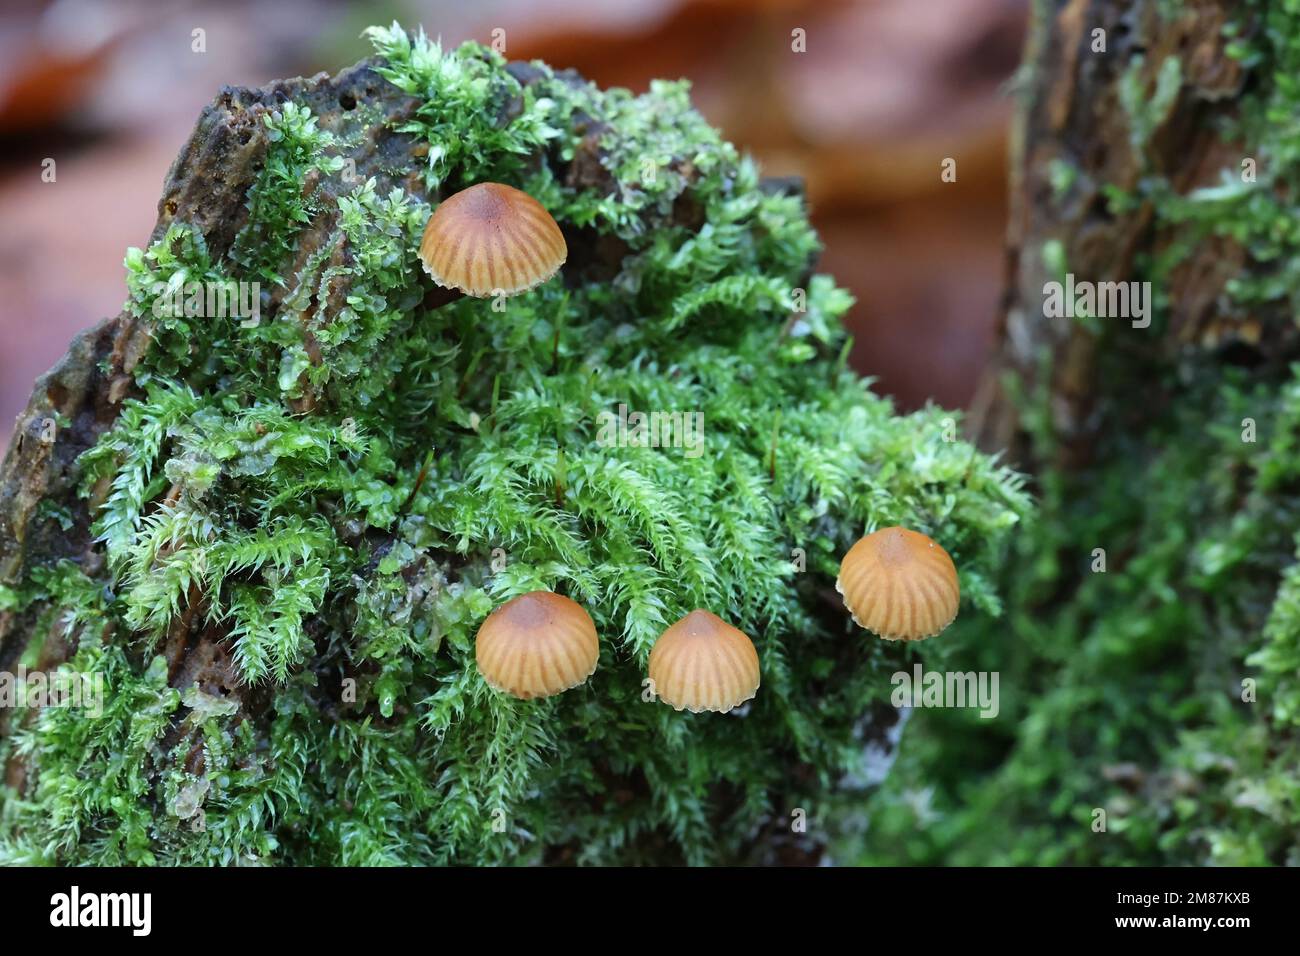 Galerina triscopa, little brown  mushroom from Finland, no common English name Stock Photo